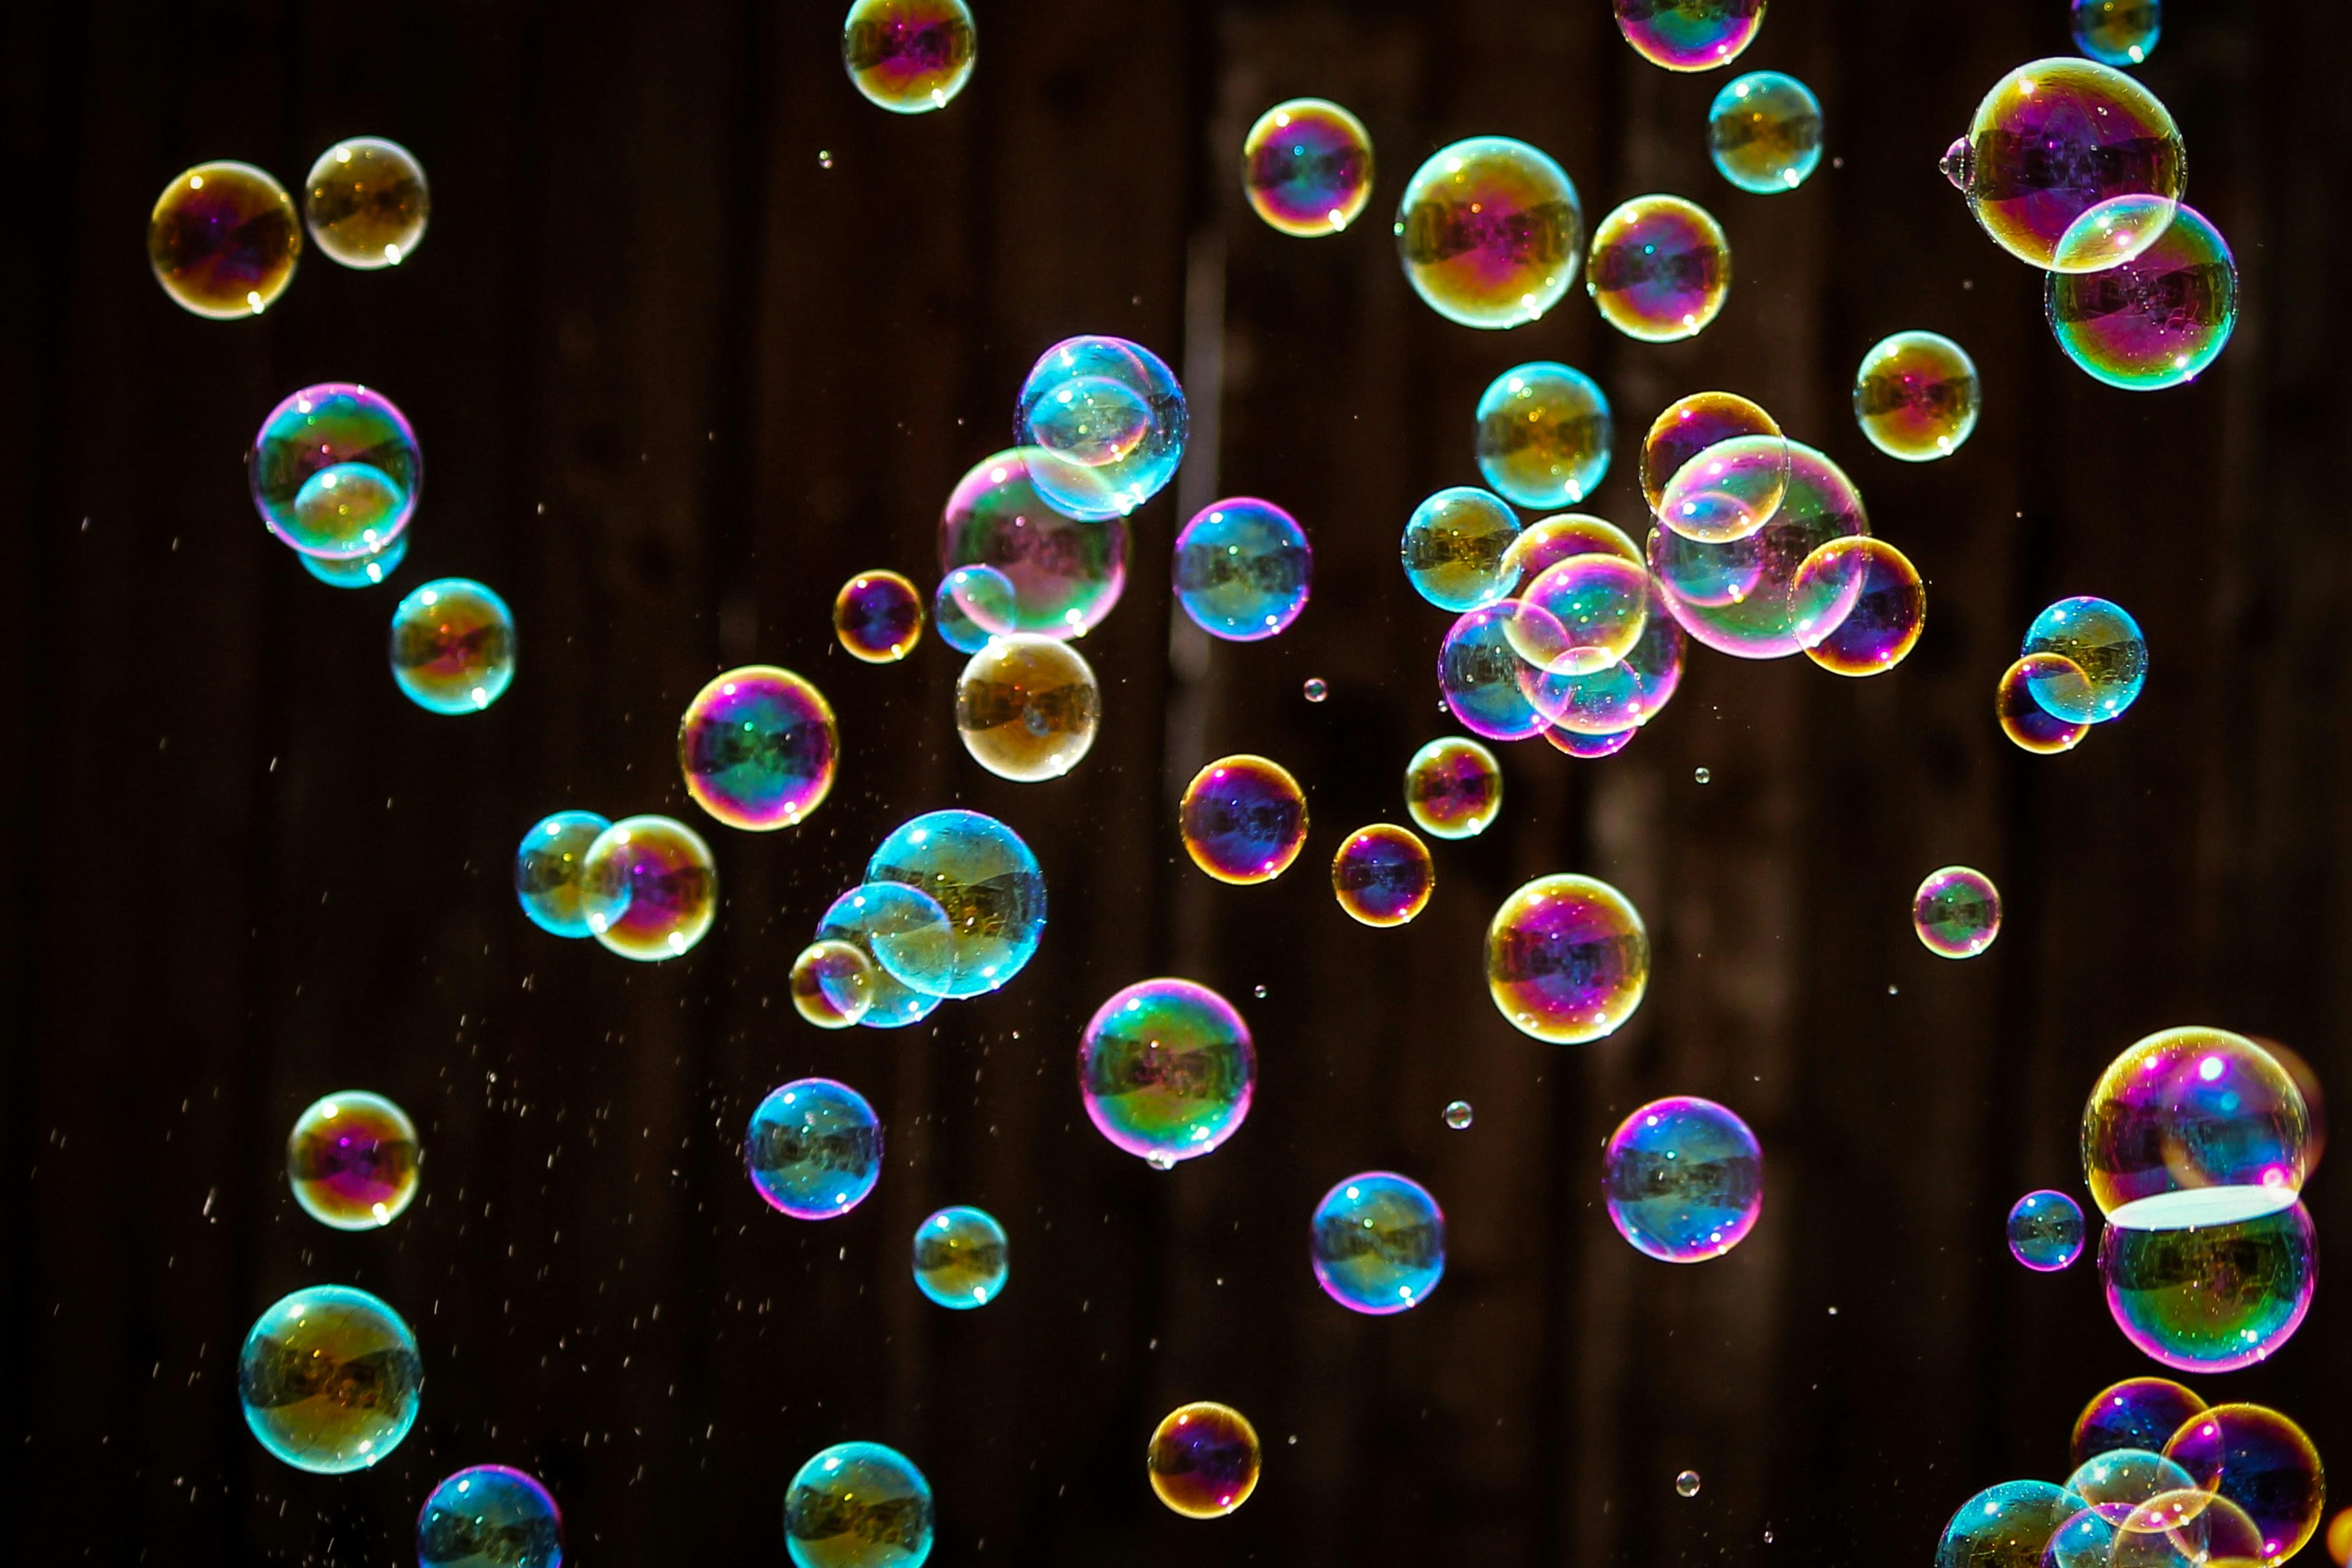 Image of many bubbles that appear to be multicolored against a dark background.